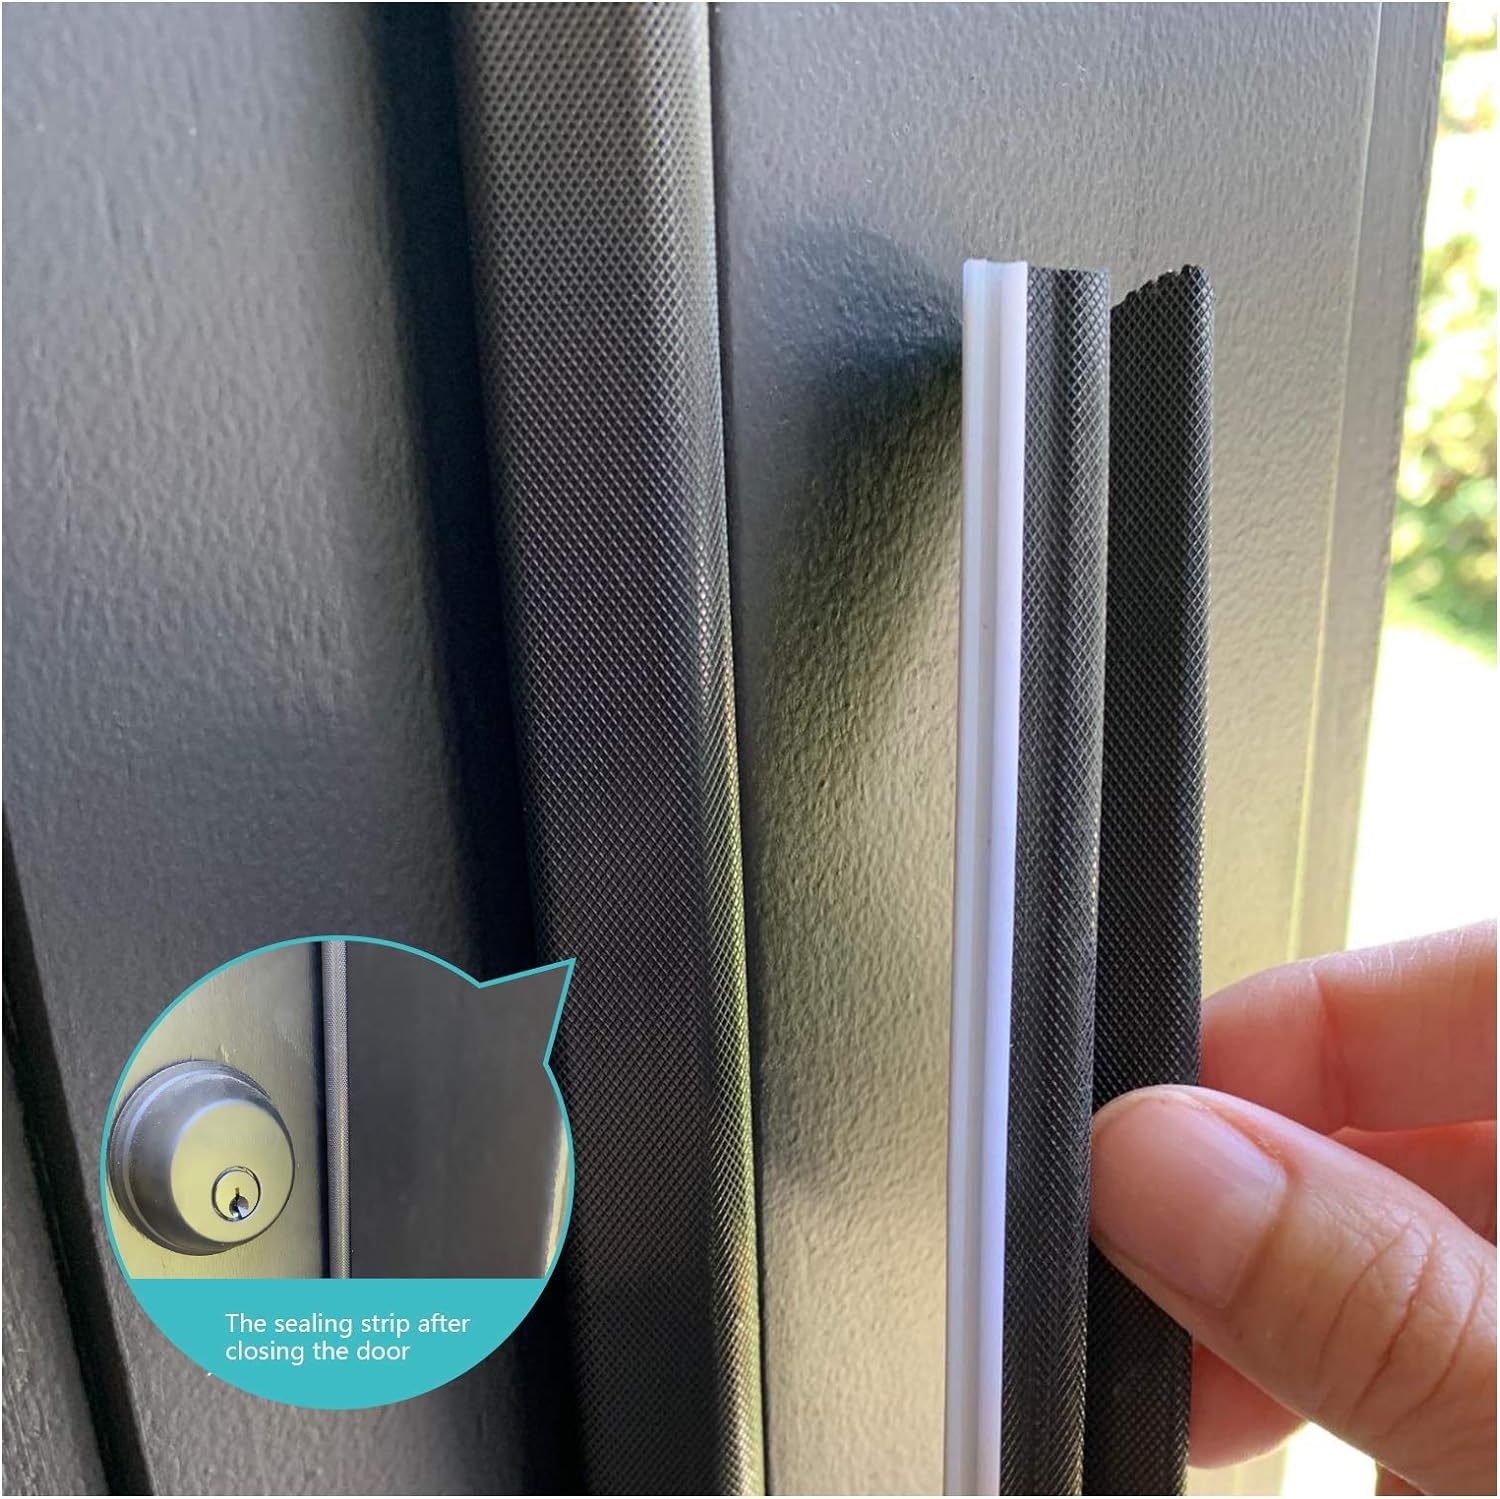 "Q" Foam Weather Stripping Seal Strip for Doors/Windows 26 Feet, Self-Adhesive Backing Seals Large Gap， Easy Cut to Size